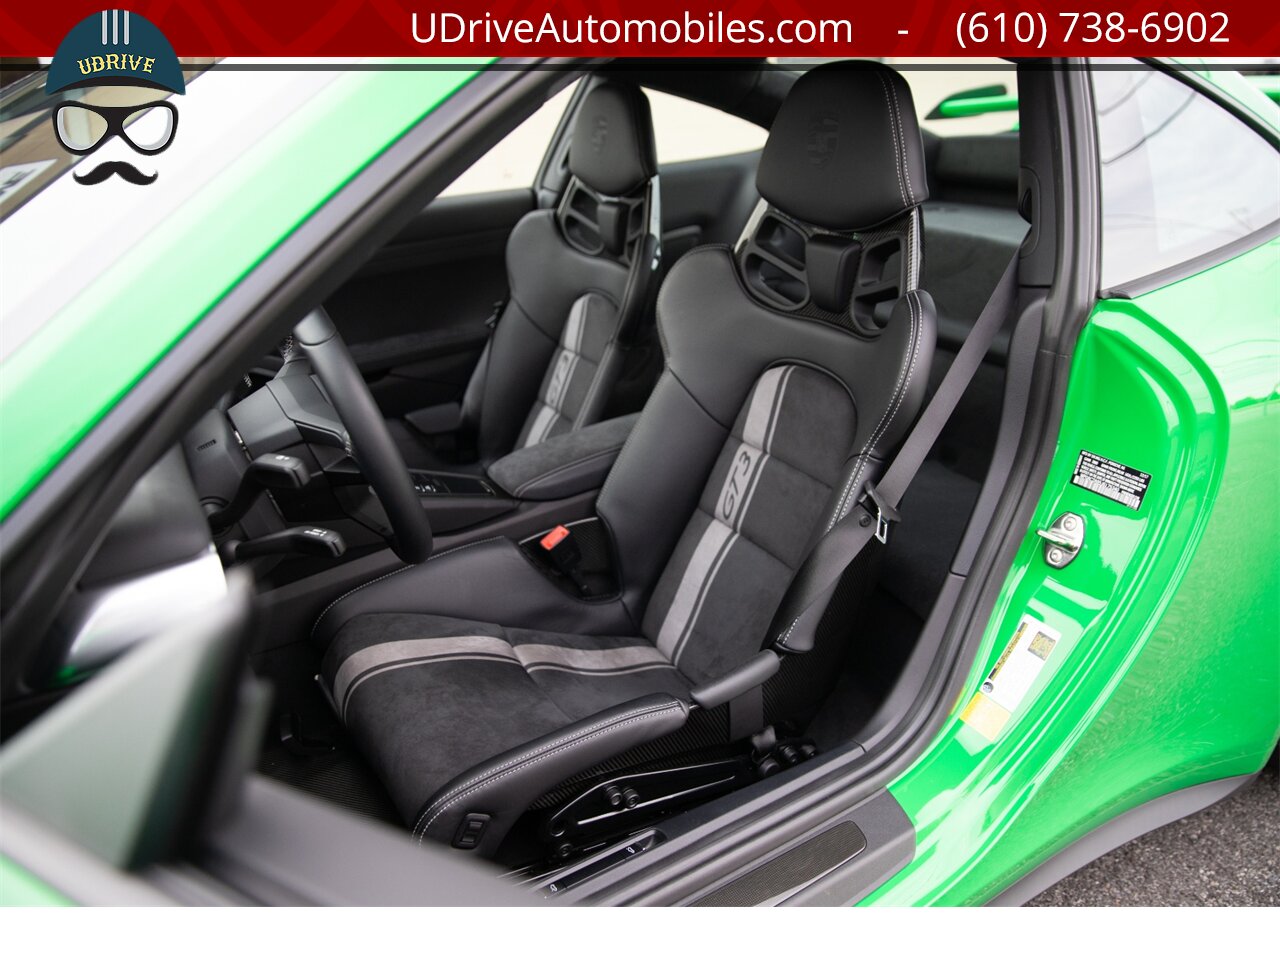 2018 Porsche 911 GT3 6 Speed Paint To Sample Viper Green 48 Miles  Front Axle Lift PCCB Carbon Bucket Seats - Photo 27 - West Chester, PA 19382